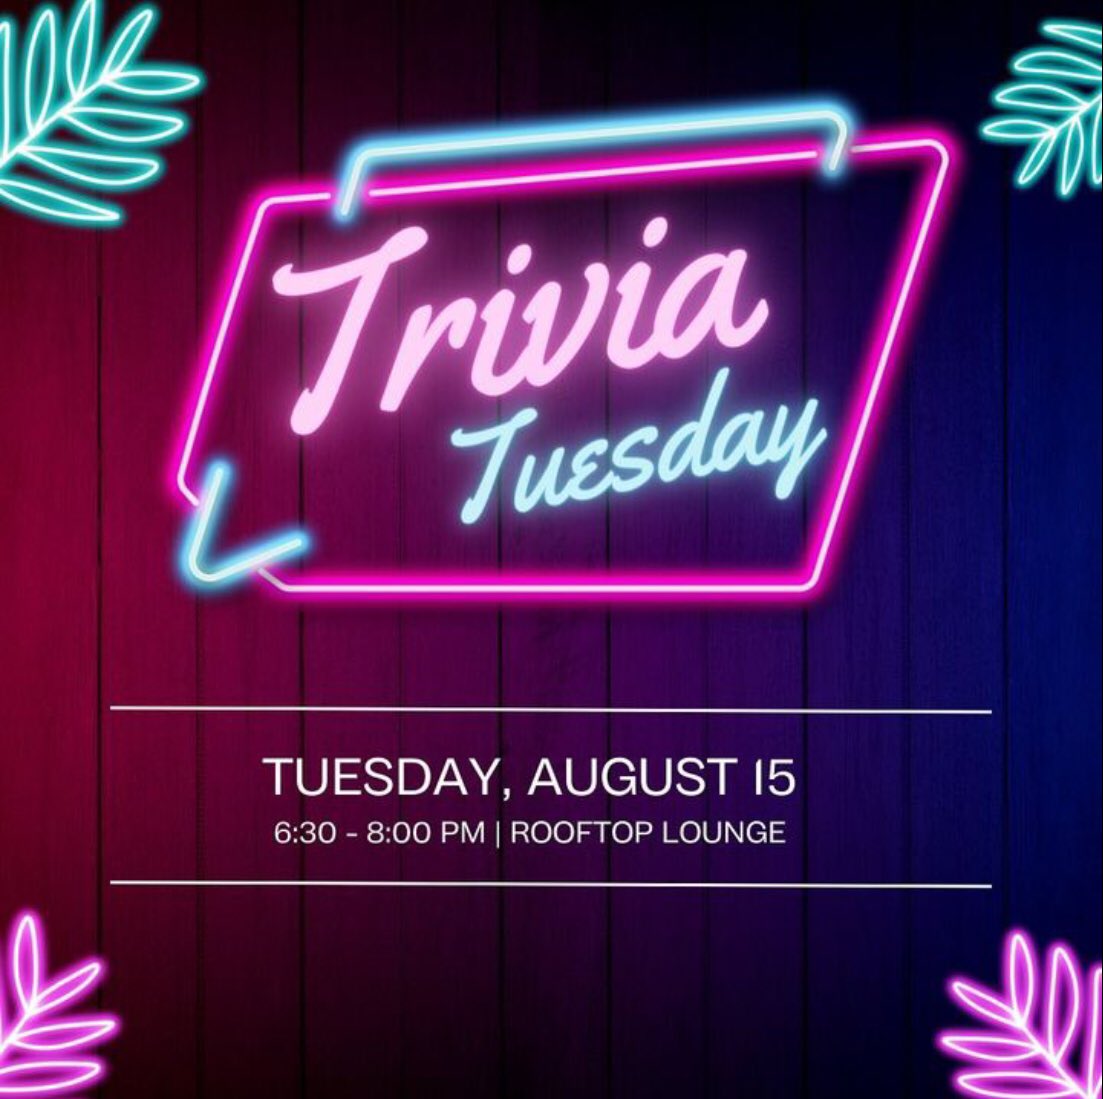 Who’s ready for Trivia Tuesday?! Join @lincolndilworth_aptlife in the rooftop lounge next Tuesday for trivia, drinks & snacks with neighbors 🎉 

#trivia #apartmentlife #events #lincolnatdilworth #lincolnpropco